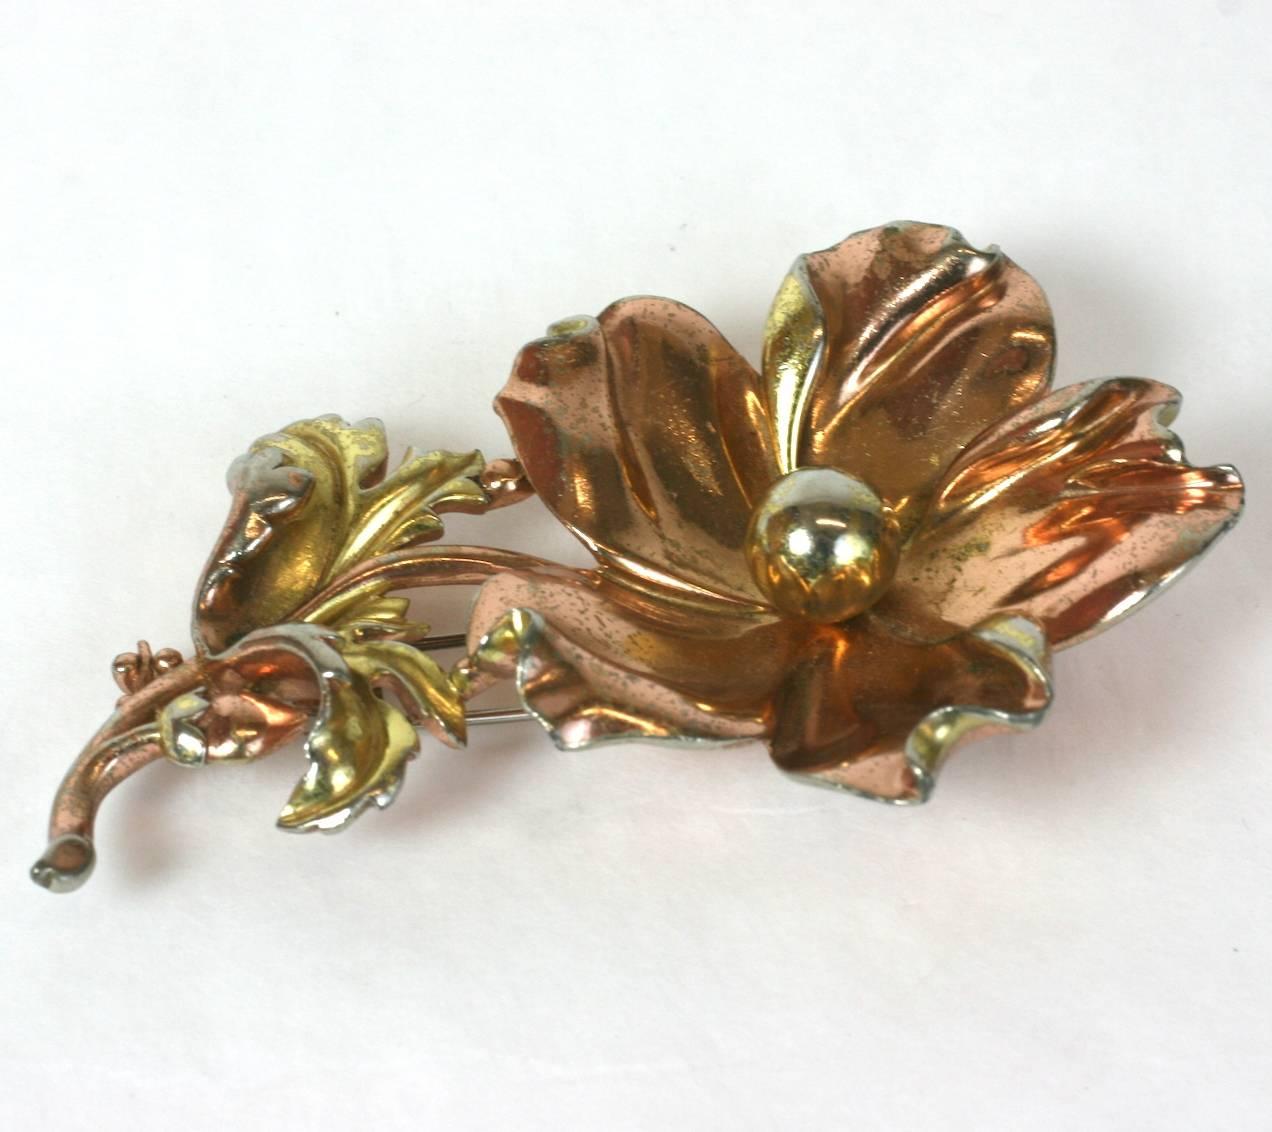 Trifari retro style poppy clip brooch of pink  and yellow gold plated 2 toned metal with fur clip fitting. Excellent Condition. Length 3.75